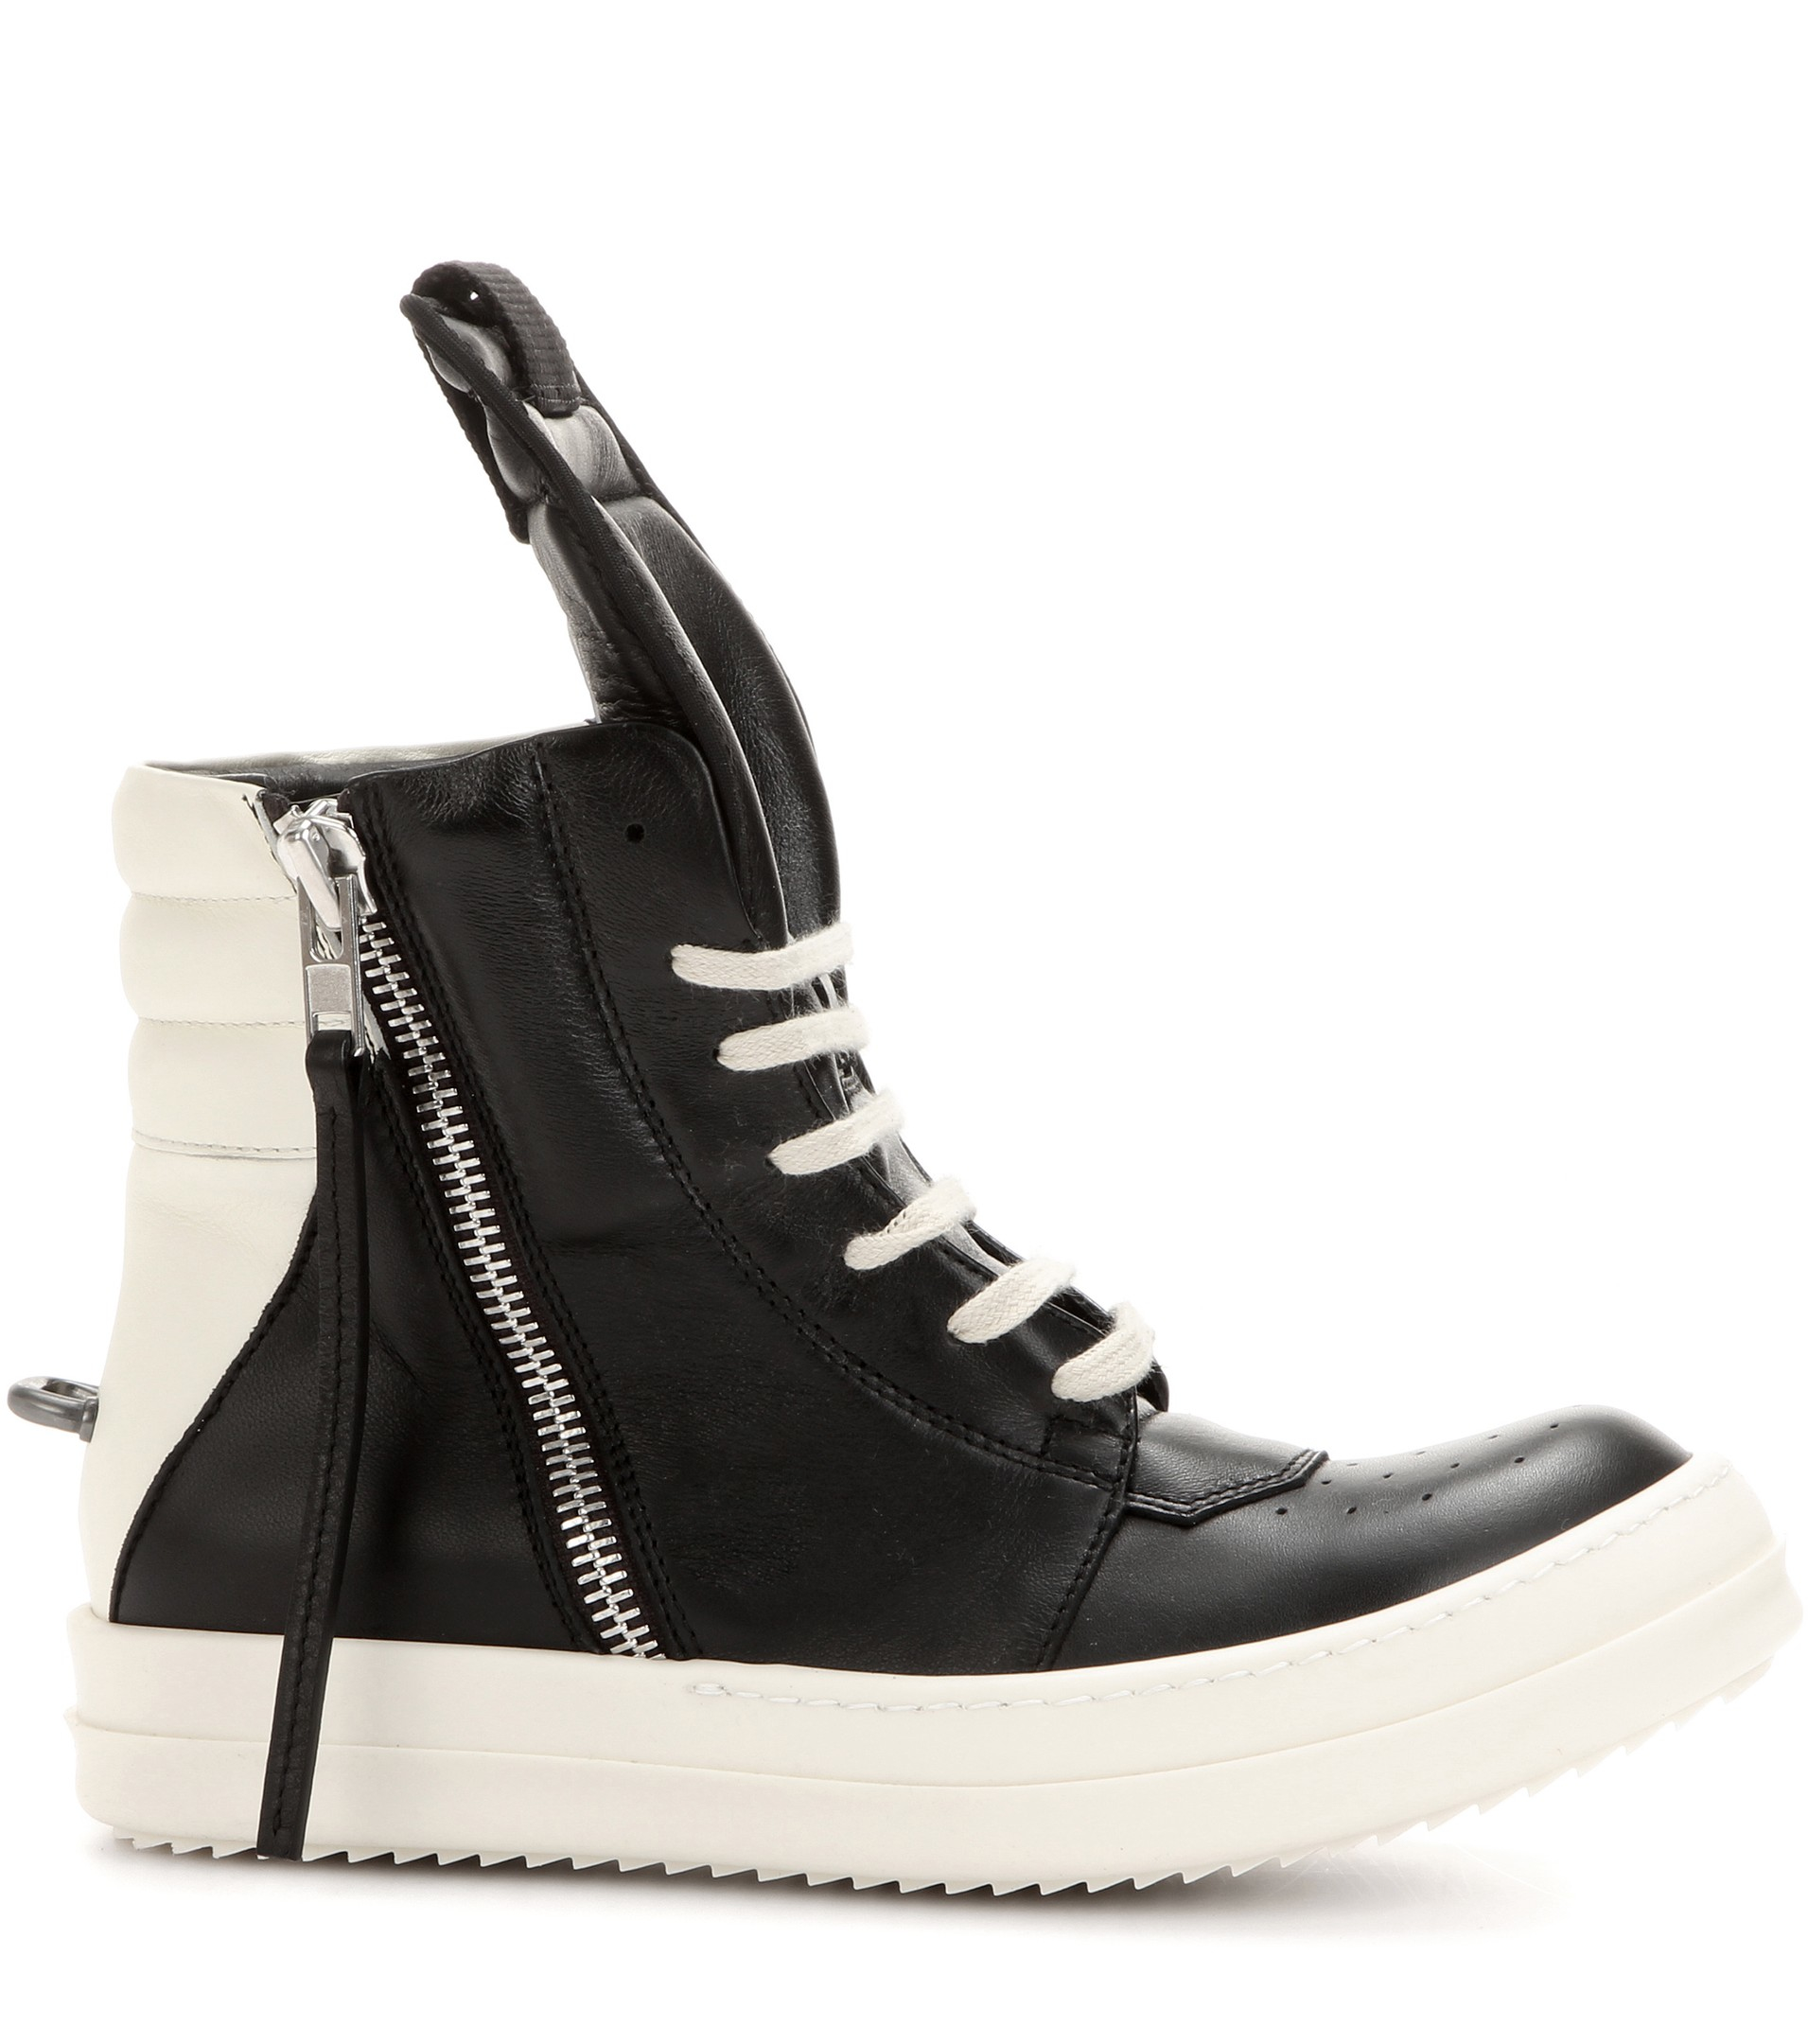 Lyst - Rick owens Leather High-top Sneakers in Black